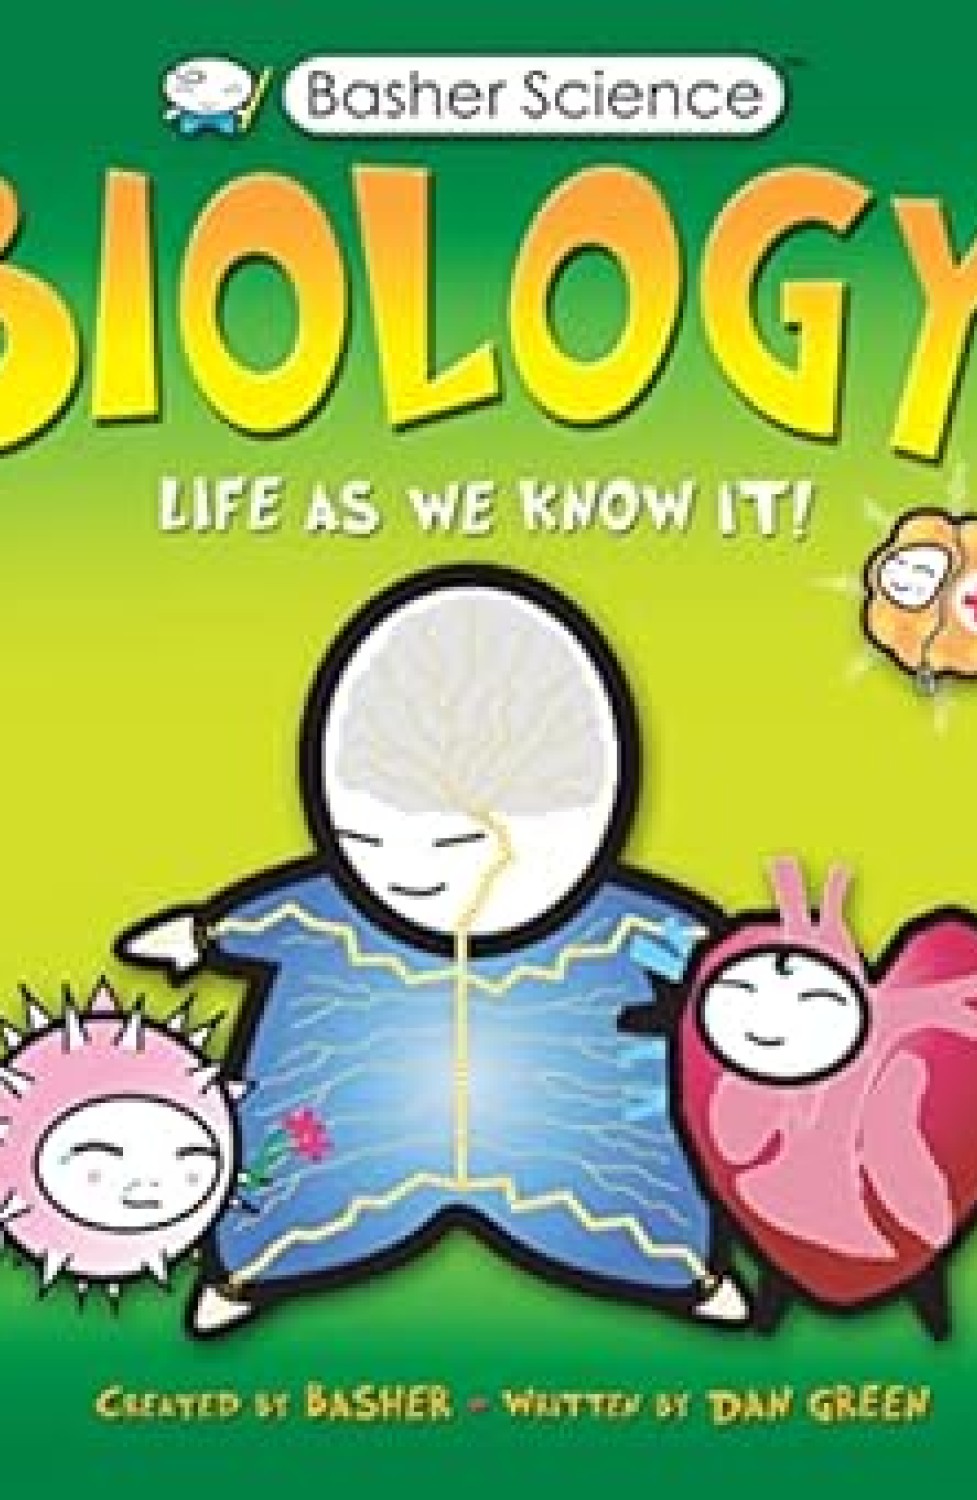 BASHER SCIENCE BIOLOGY : LIFE AS WE KNOW IT